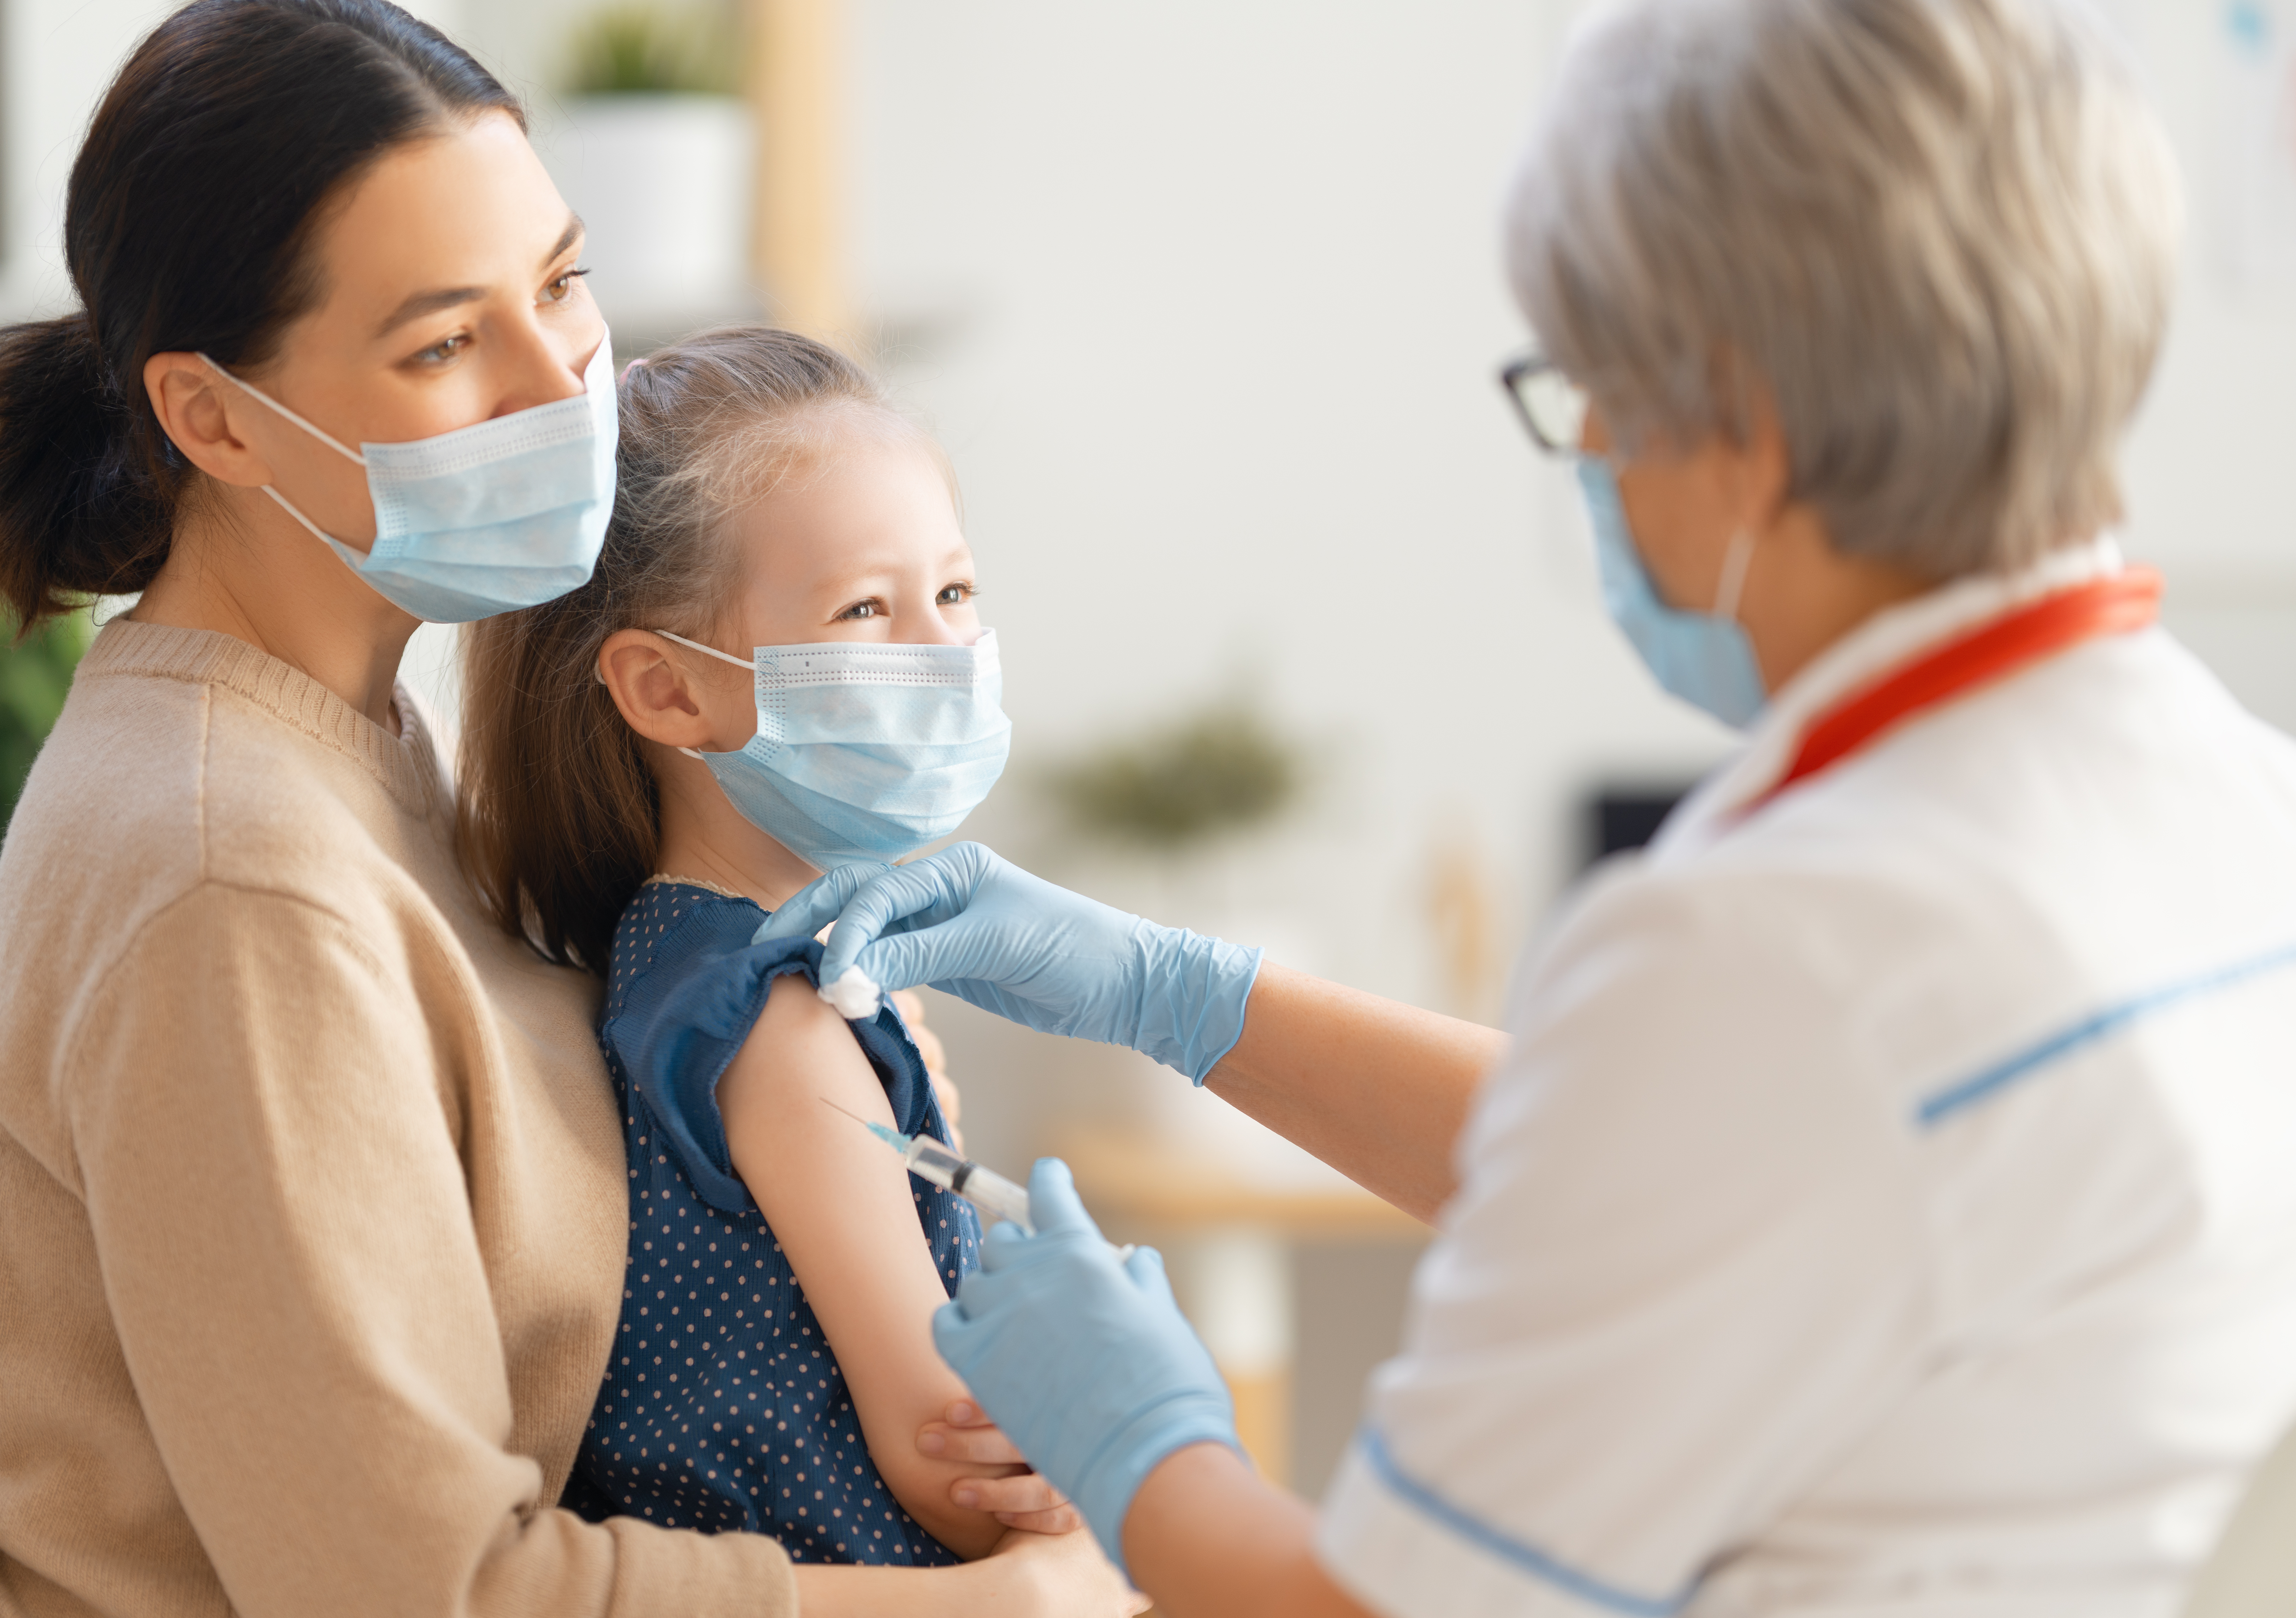 Stock photo of a parent and child with surgical masks on visiting an out-of-focus doctor.